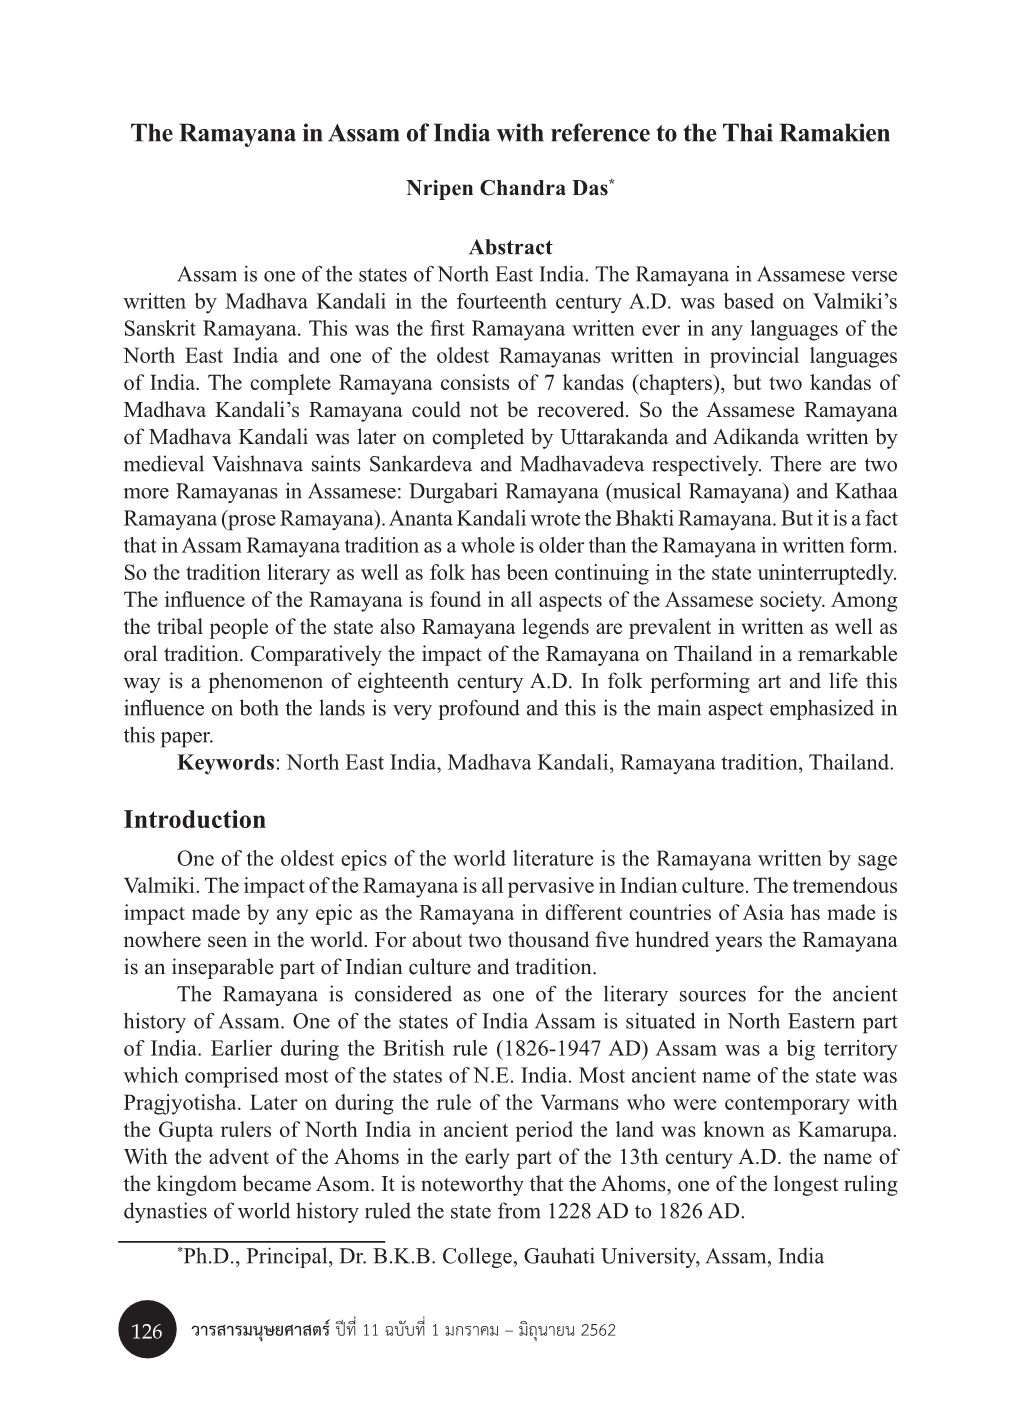 The Ramayana in Assam of India with Reference to the Thai Ramakien